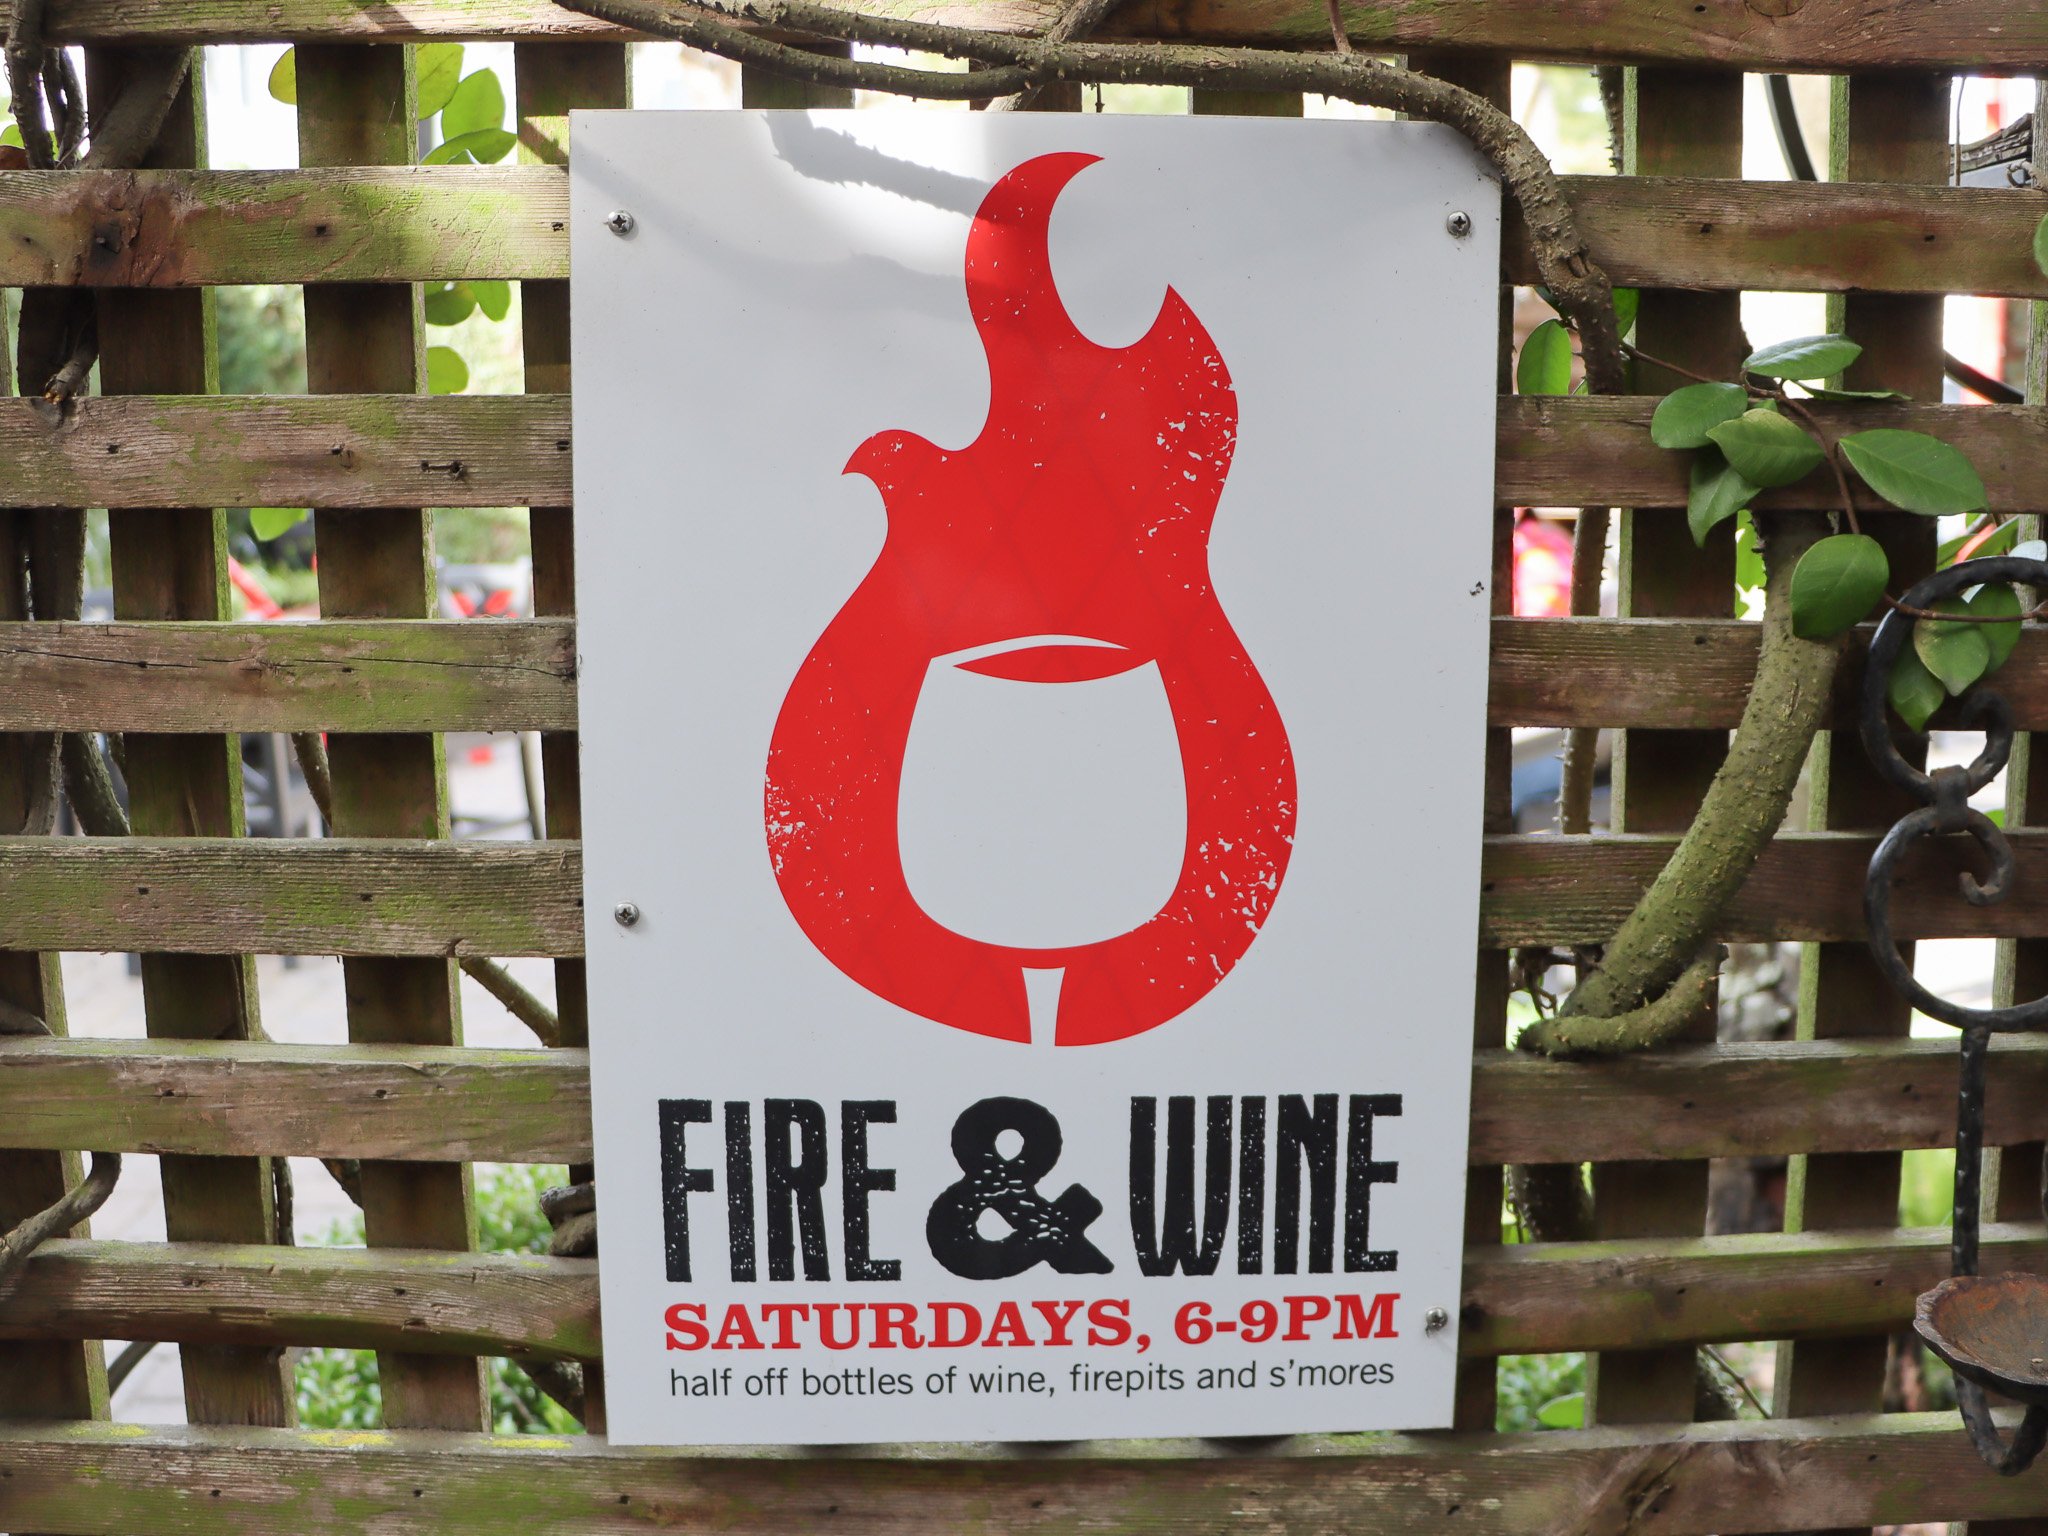 Get cozy this Saturday at Fire &amp; Wine! From 6-9PM, sip on half-priced bottles of wine, gather 'round the fire pits, and enjoy complimentary marshmallows. Add some sweetness with our s'more's kits available for purchase! 

#visitsavannahga #foxylo